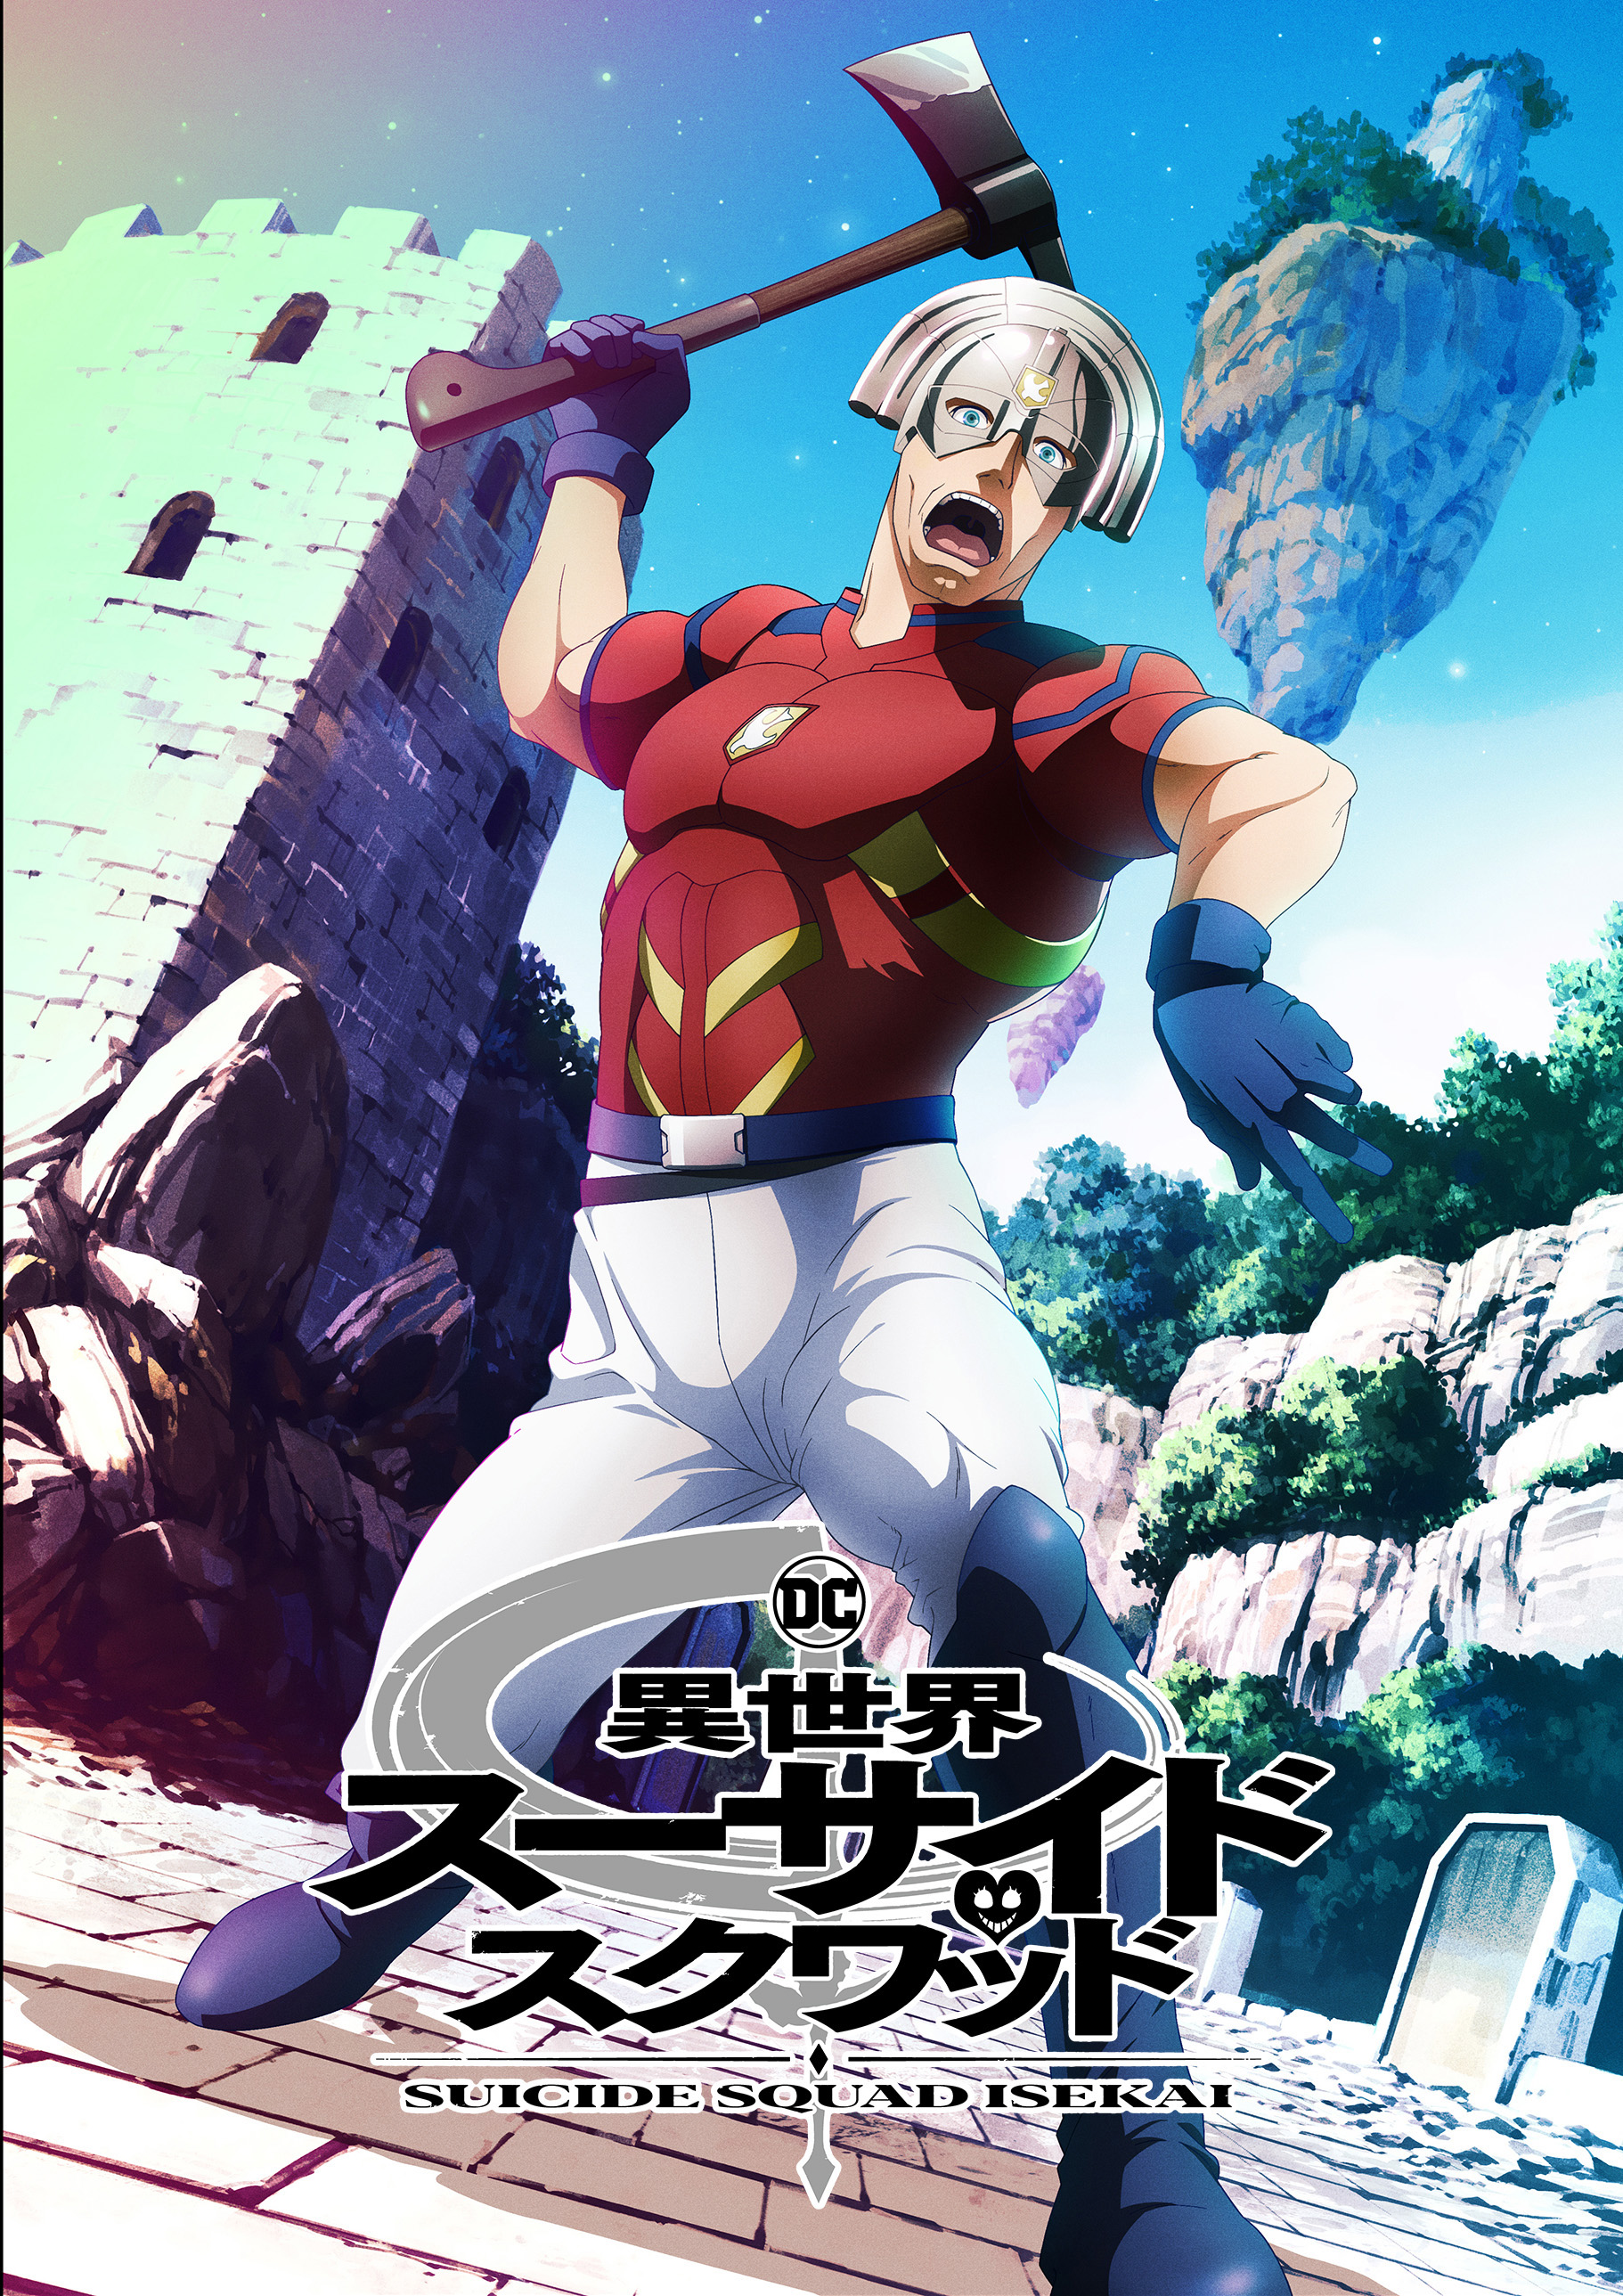 1701639063 599 Suicide Squad ISEKAI Anime he lo hinh anh nhan vat